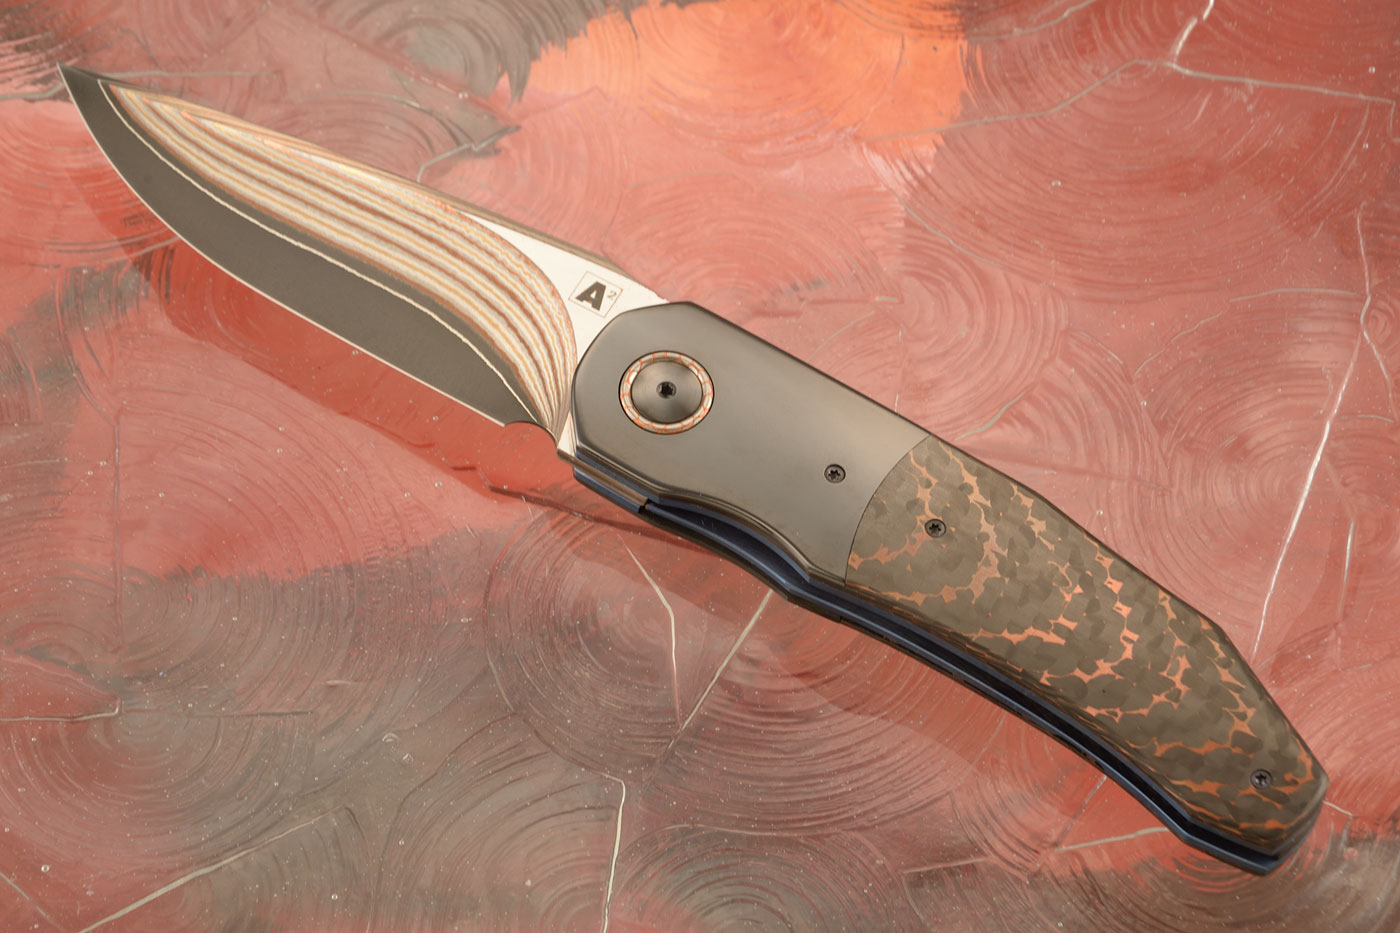 A9 Dress Front Flipper with Copper Snakeskin FatCarbon, Zirconium and Super Conductor (Ceramic IKBS) - Stainless Yu-Shoku